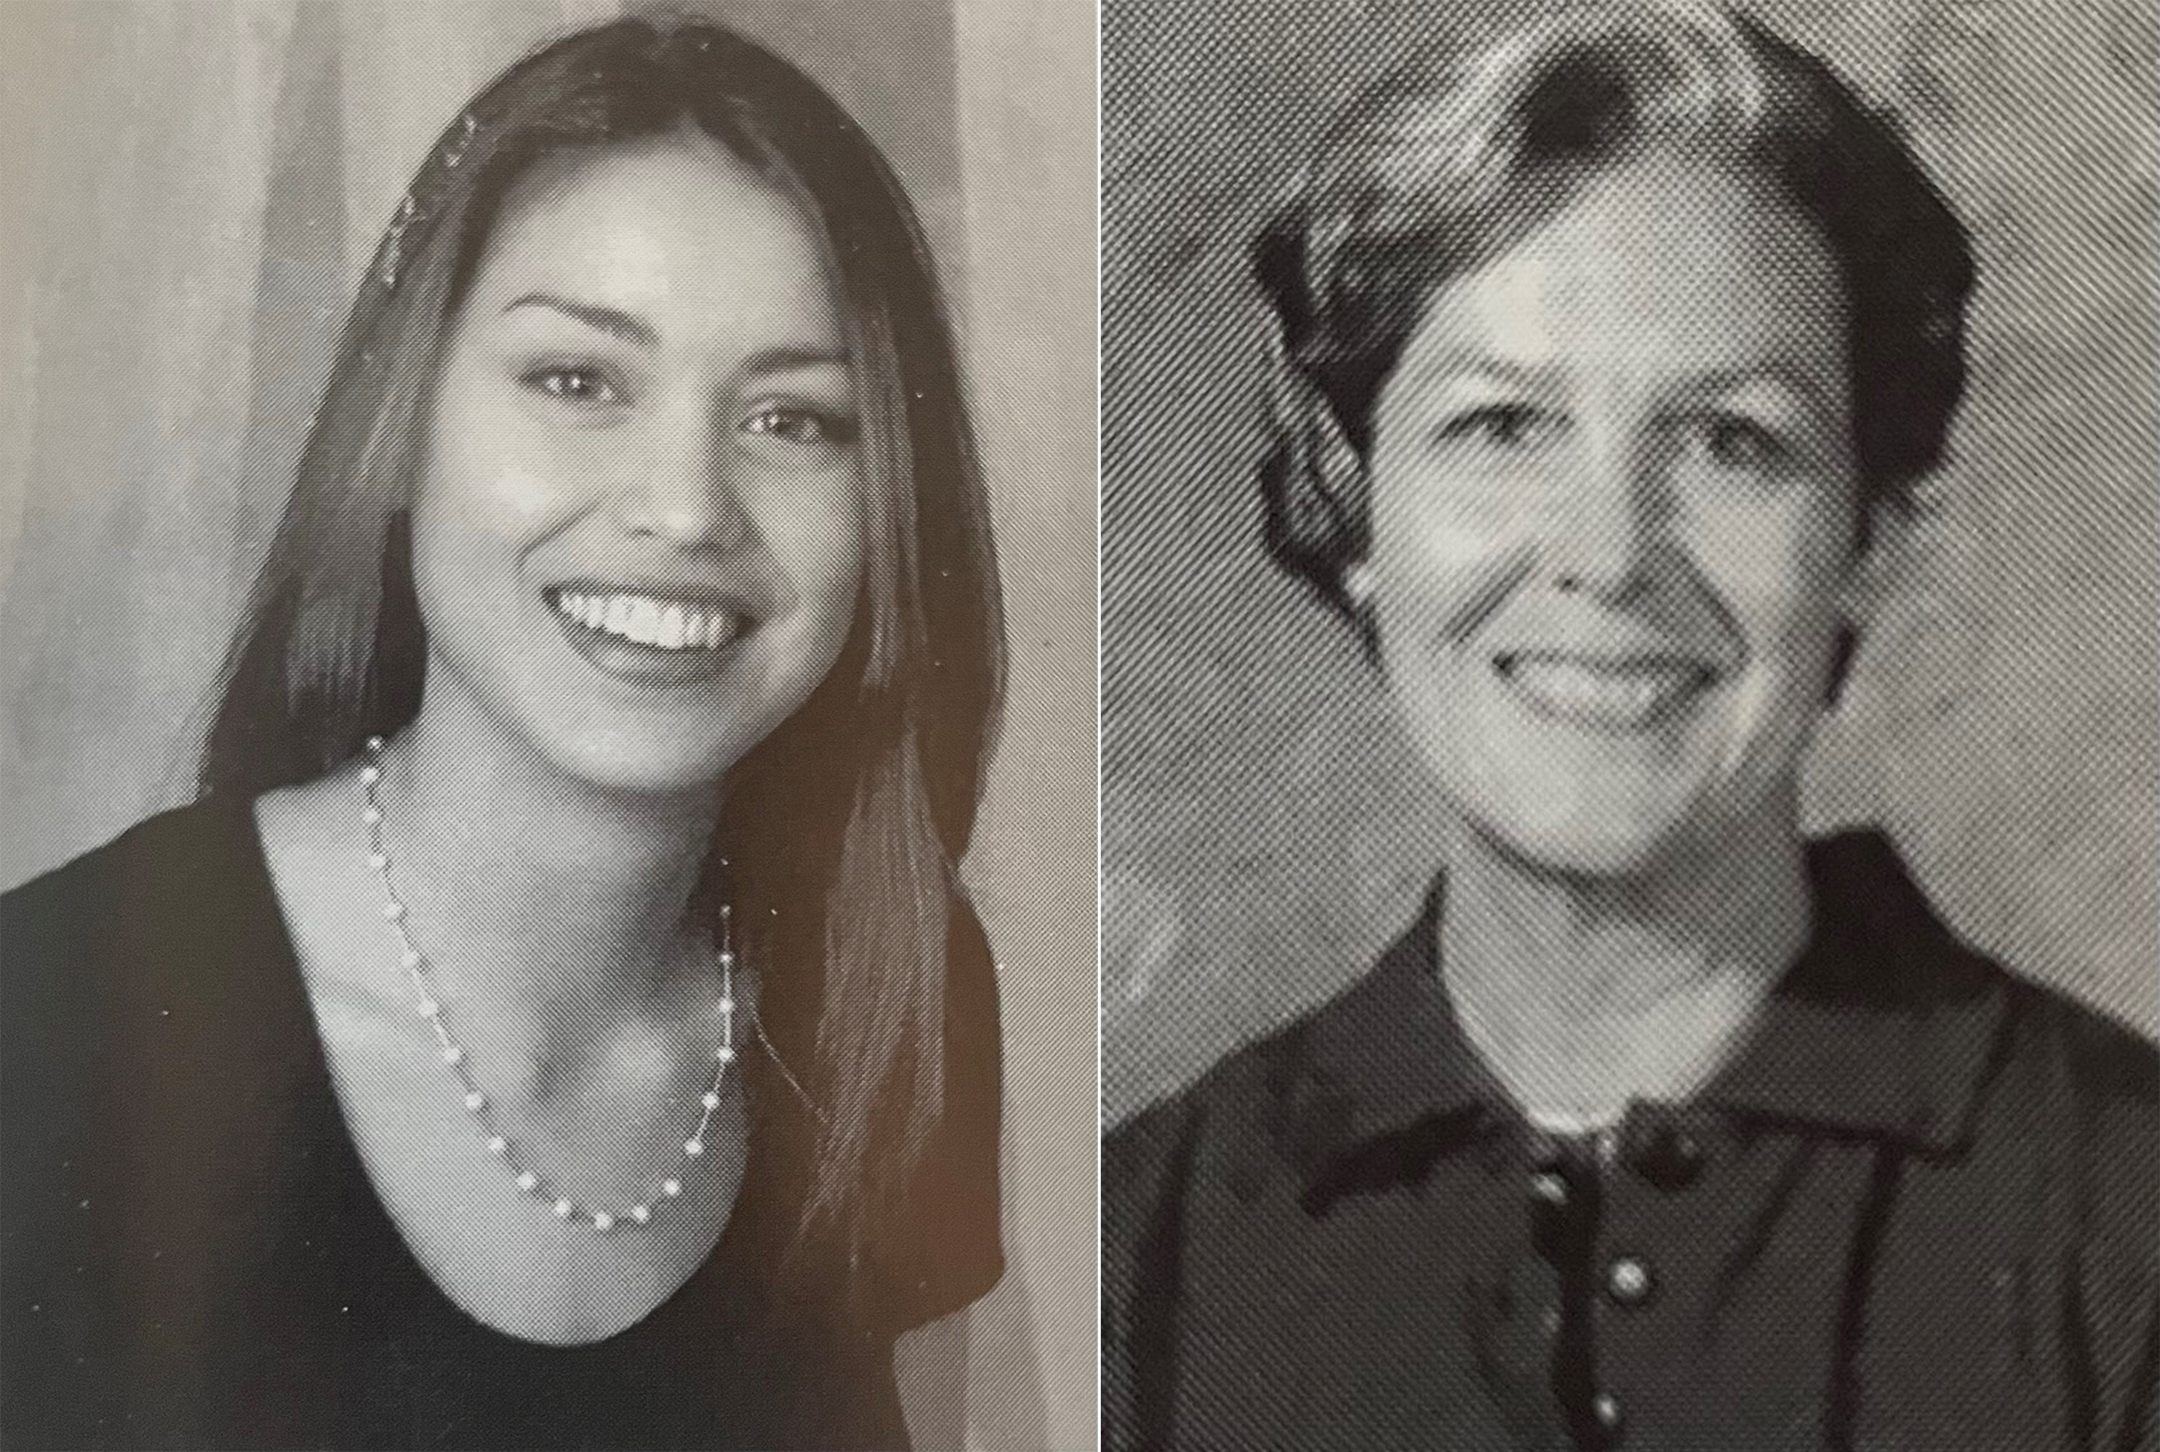 Two black and white photos, side by side, of a young woman student on the left and an older woman teacher on the right